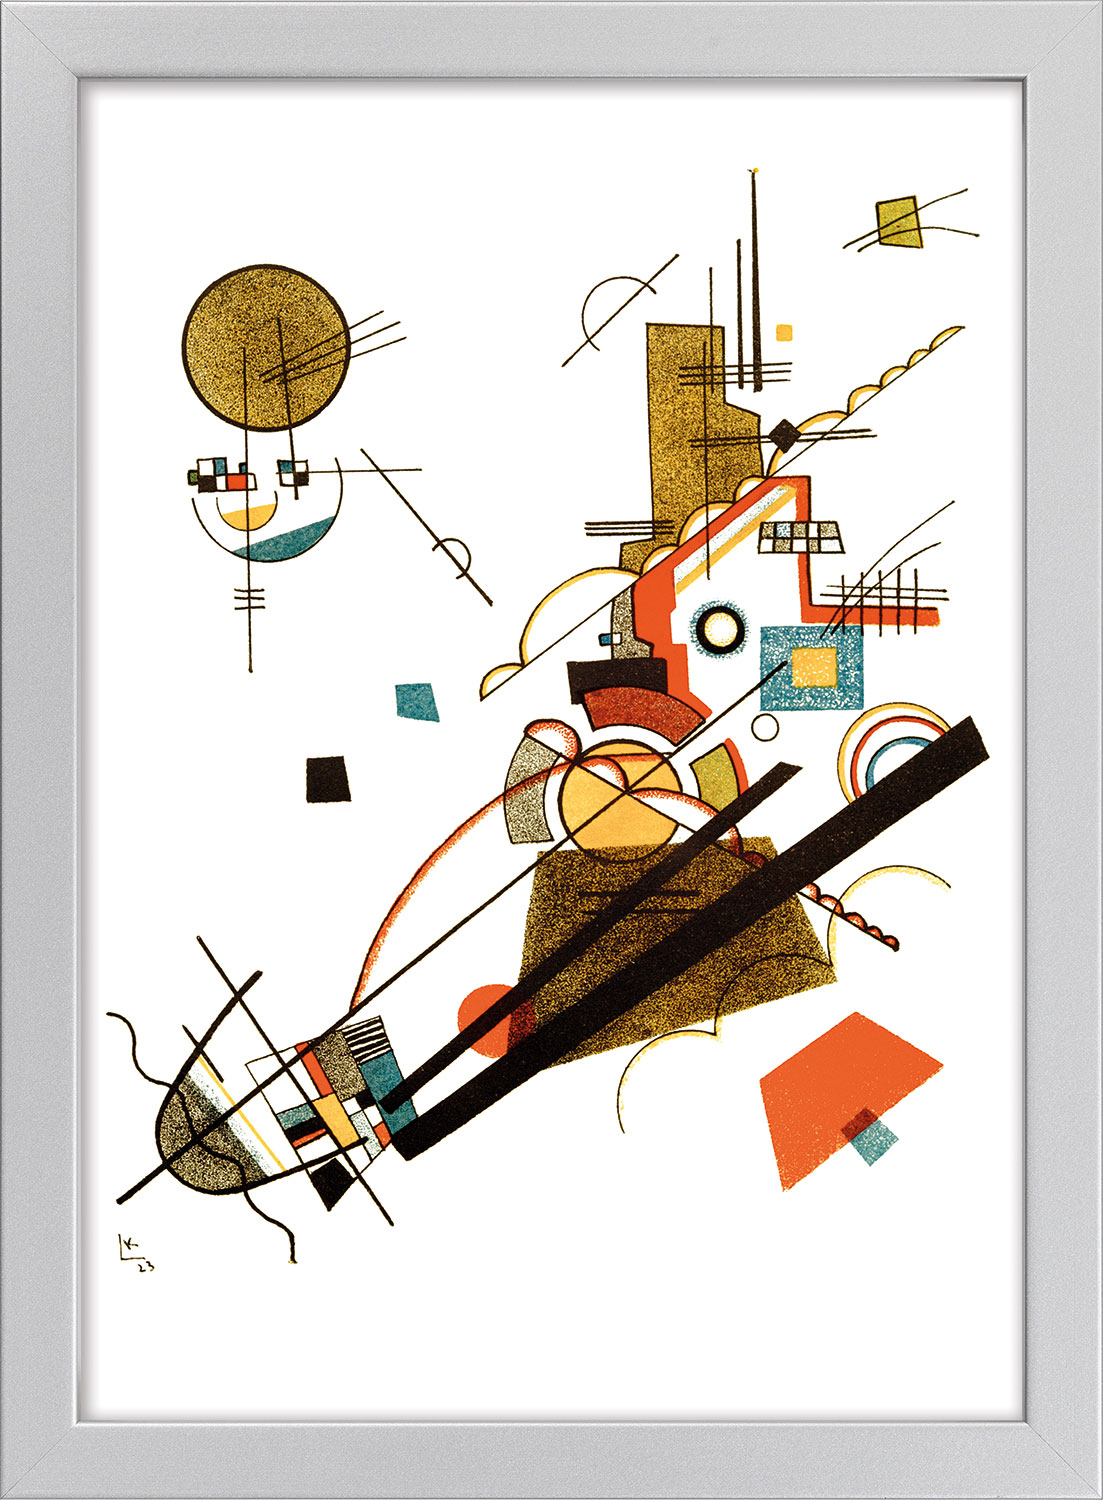 Picture "Happy Ascent" (1923), framed by Wassily Kandinsky